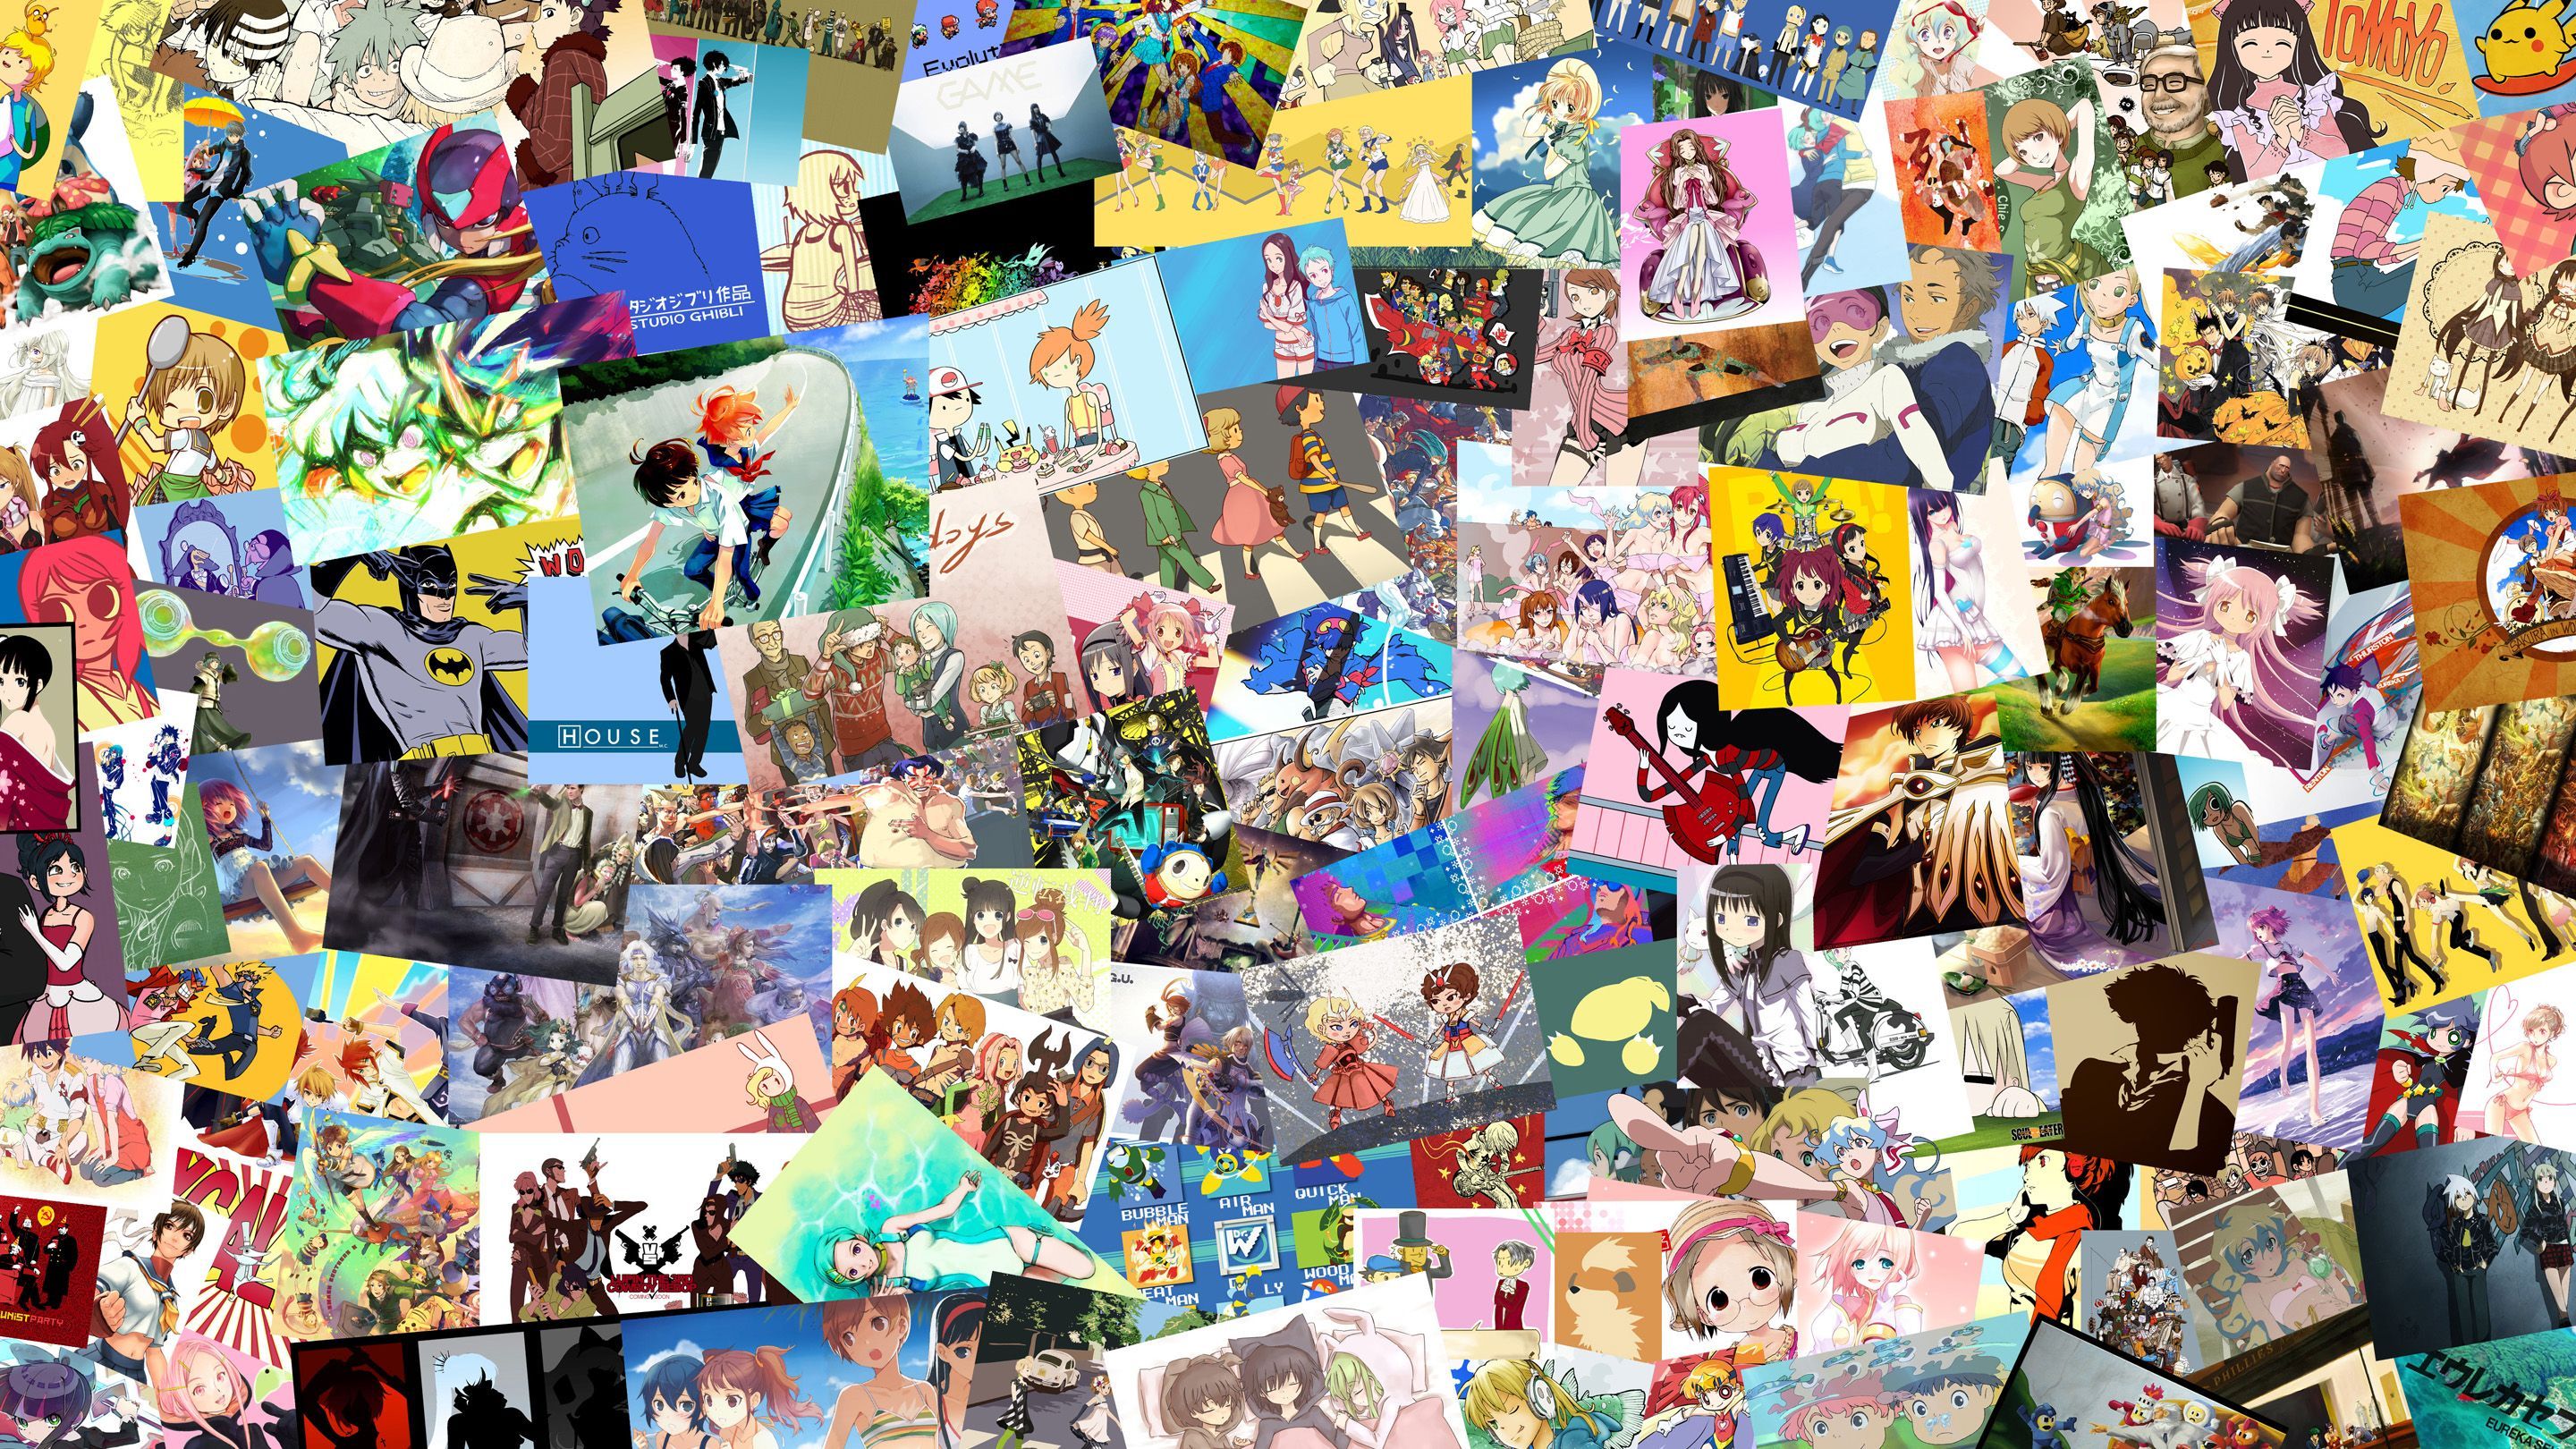 Anime Collage Wallpaper Free Anime Collage